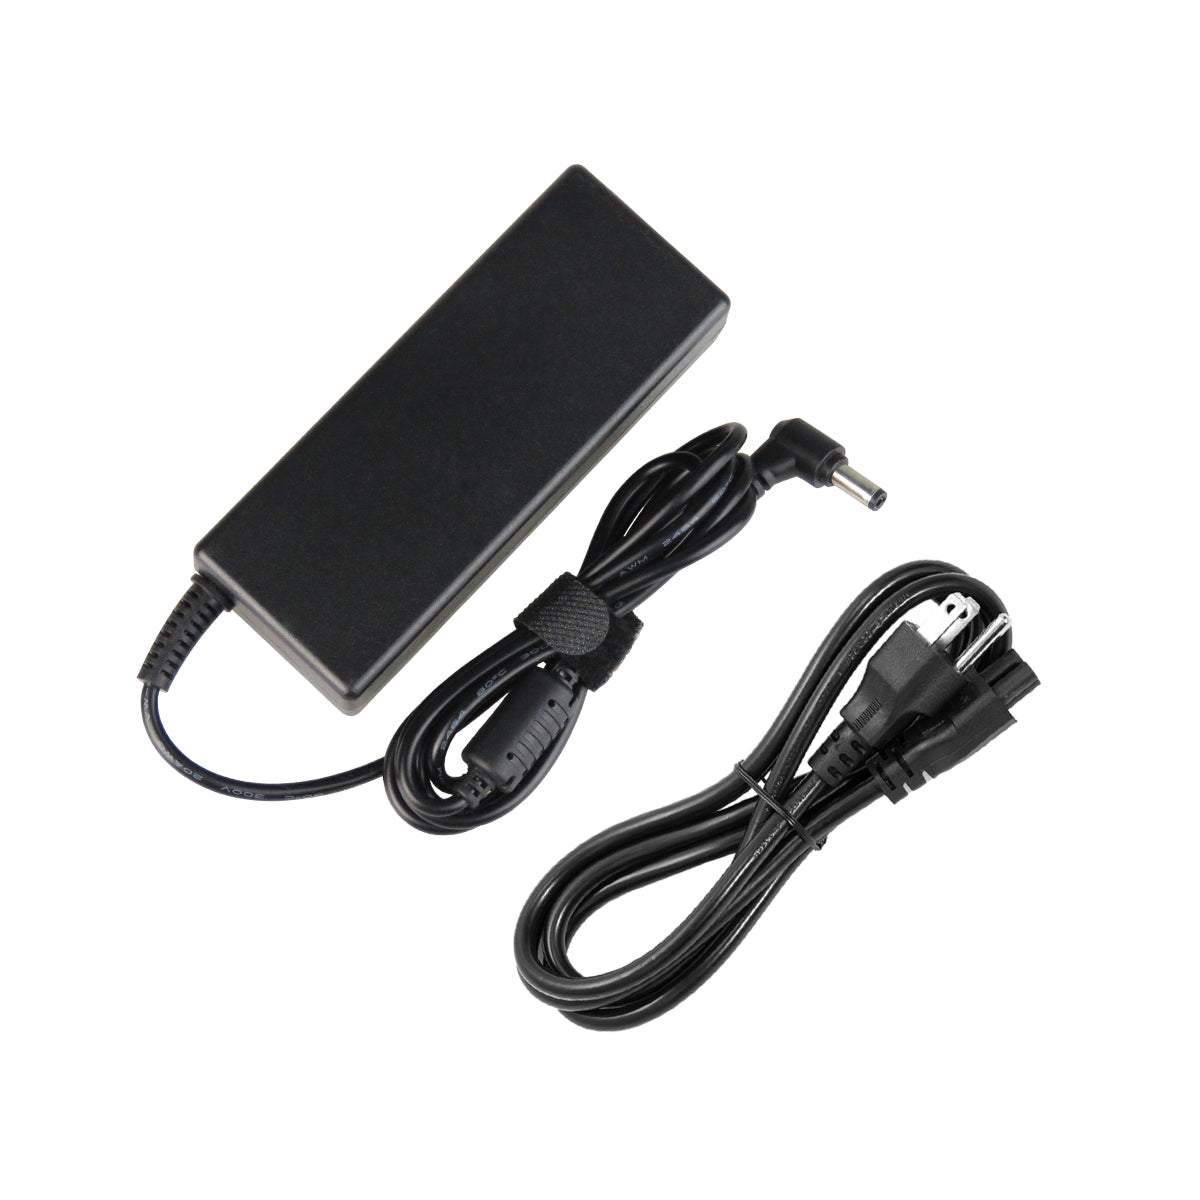 AC Adapter Charger for ASUS X66 Notebook.